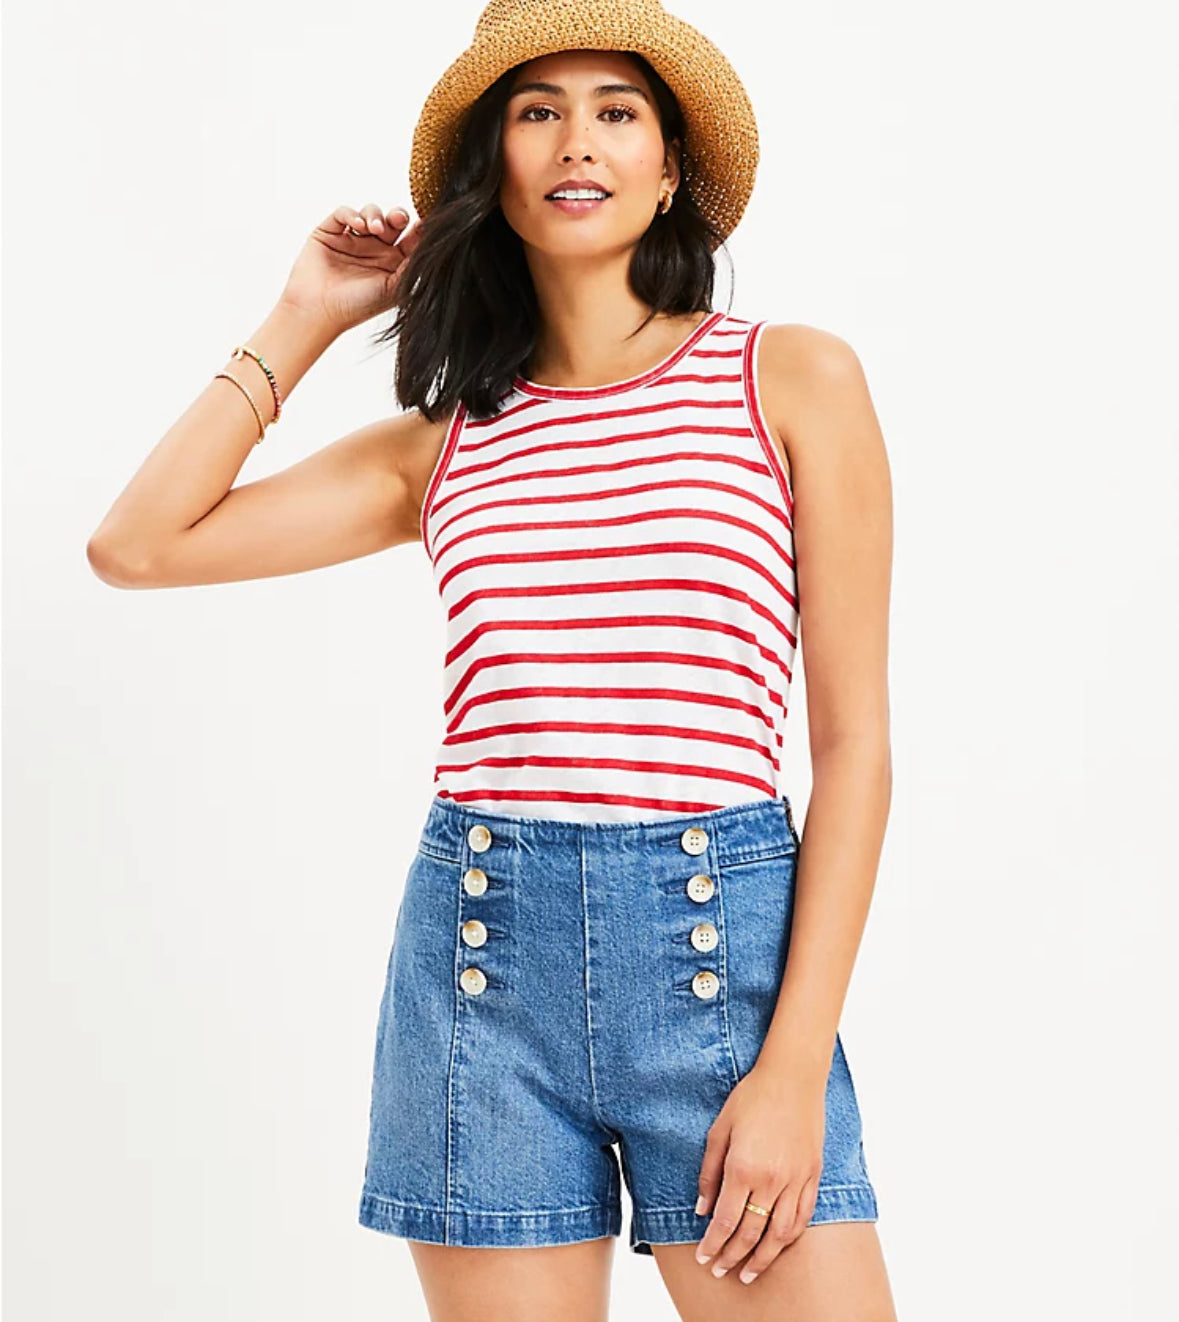 LOFT New Red/White Striped Tank Size Small